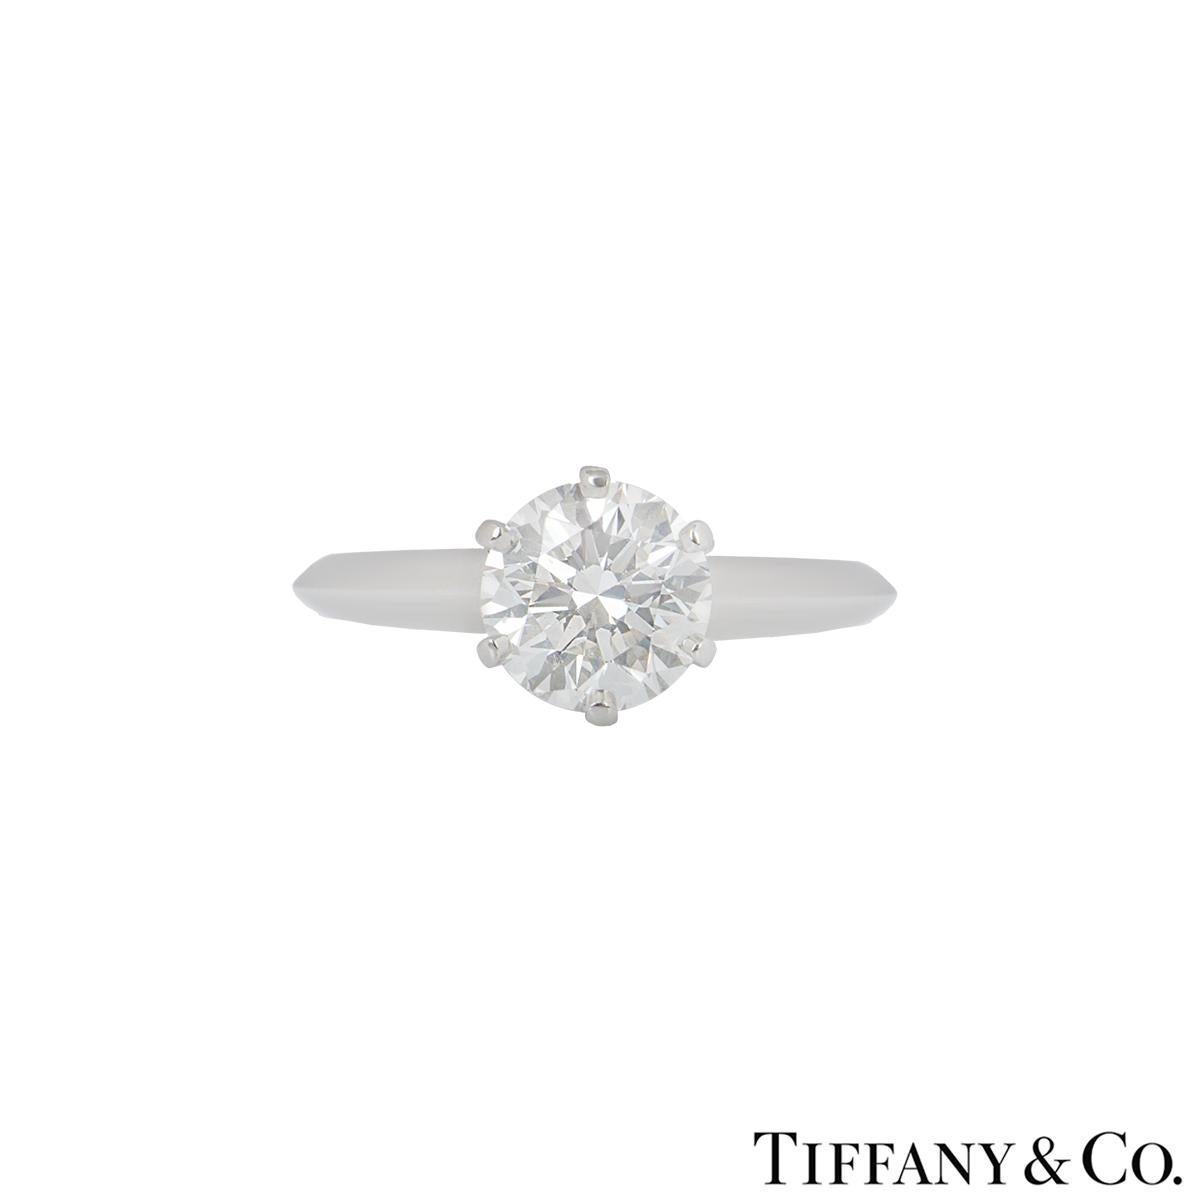 A beautiful platinum Tiffany & Co. diamond engagement ring from the setting collection. The ring comprises of a round brilliant cut diamond in a 6 claw setting with a weight of 1.50ct, I colour and VS1 in clarity. The ring is currently a size is